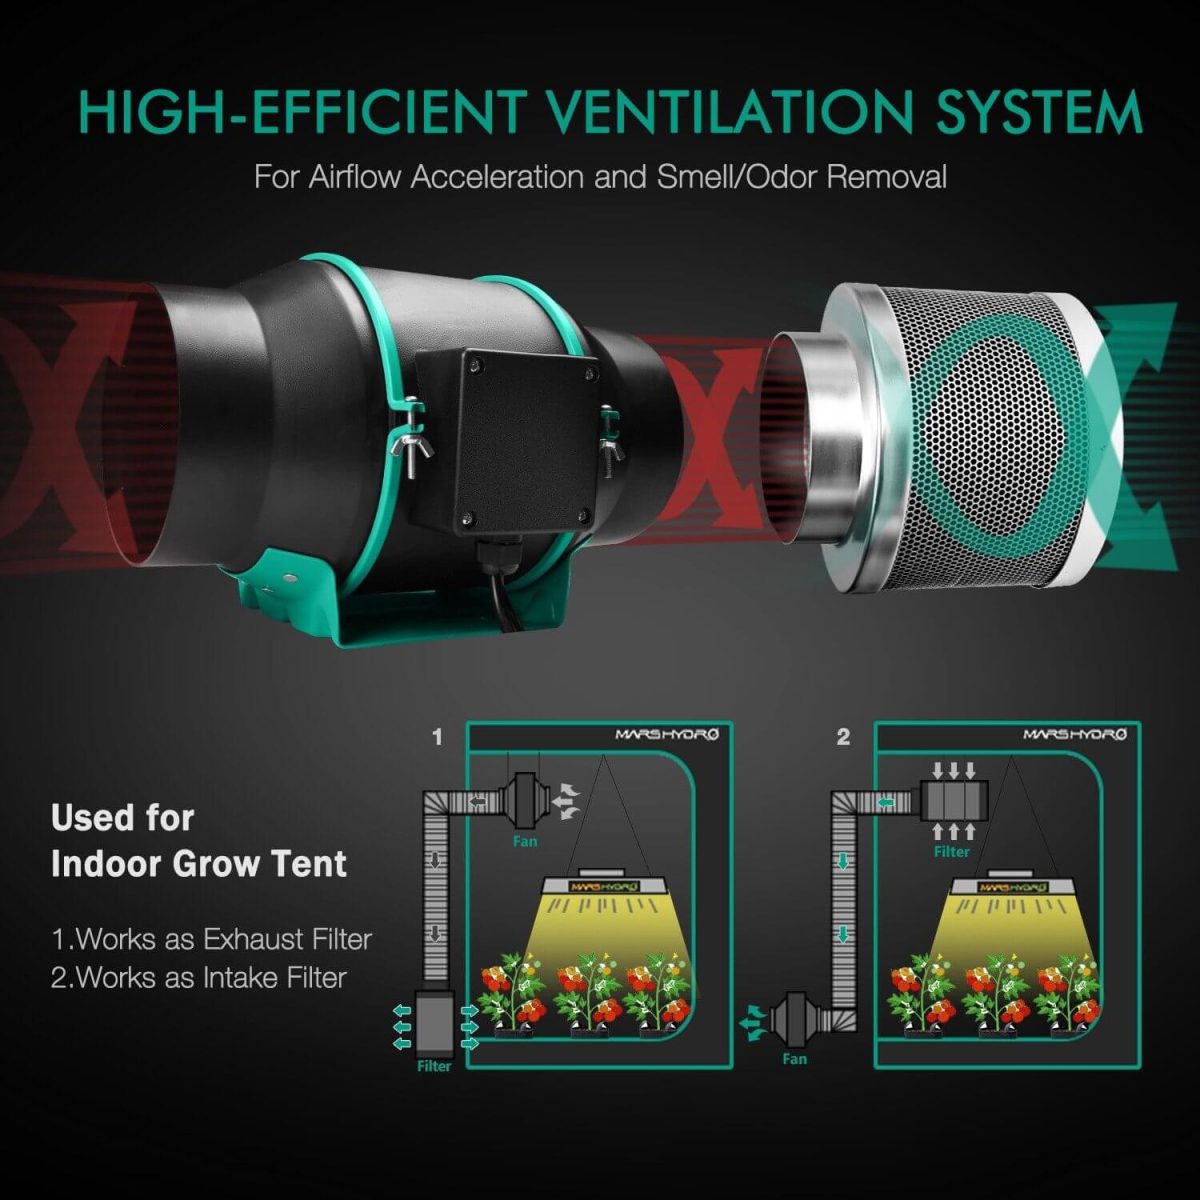 High efficient ventilation system for airflow acceleration and smell/odor removal